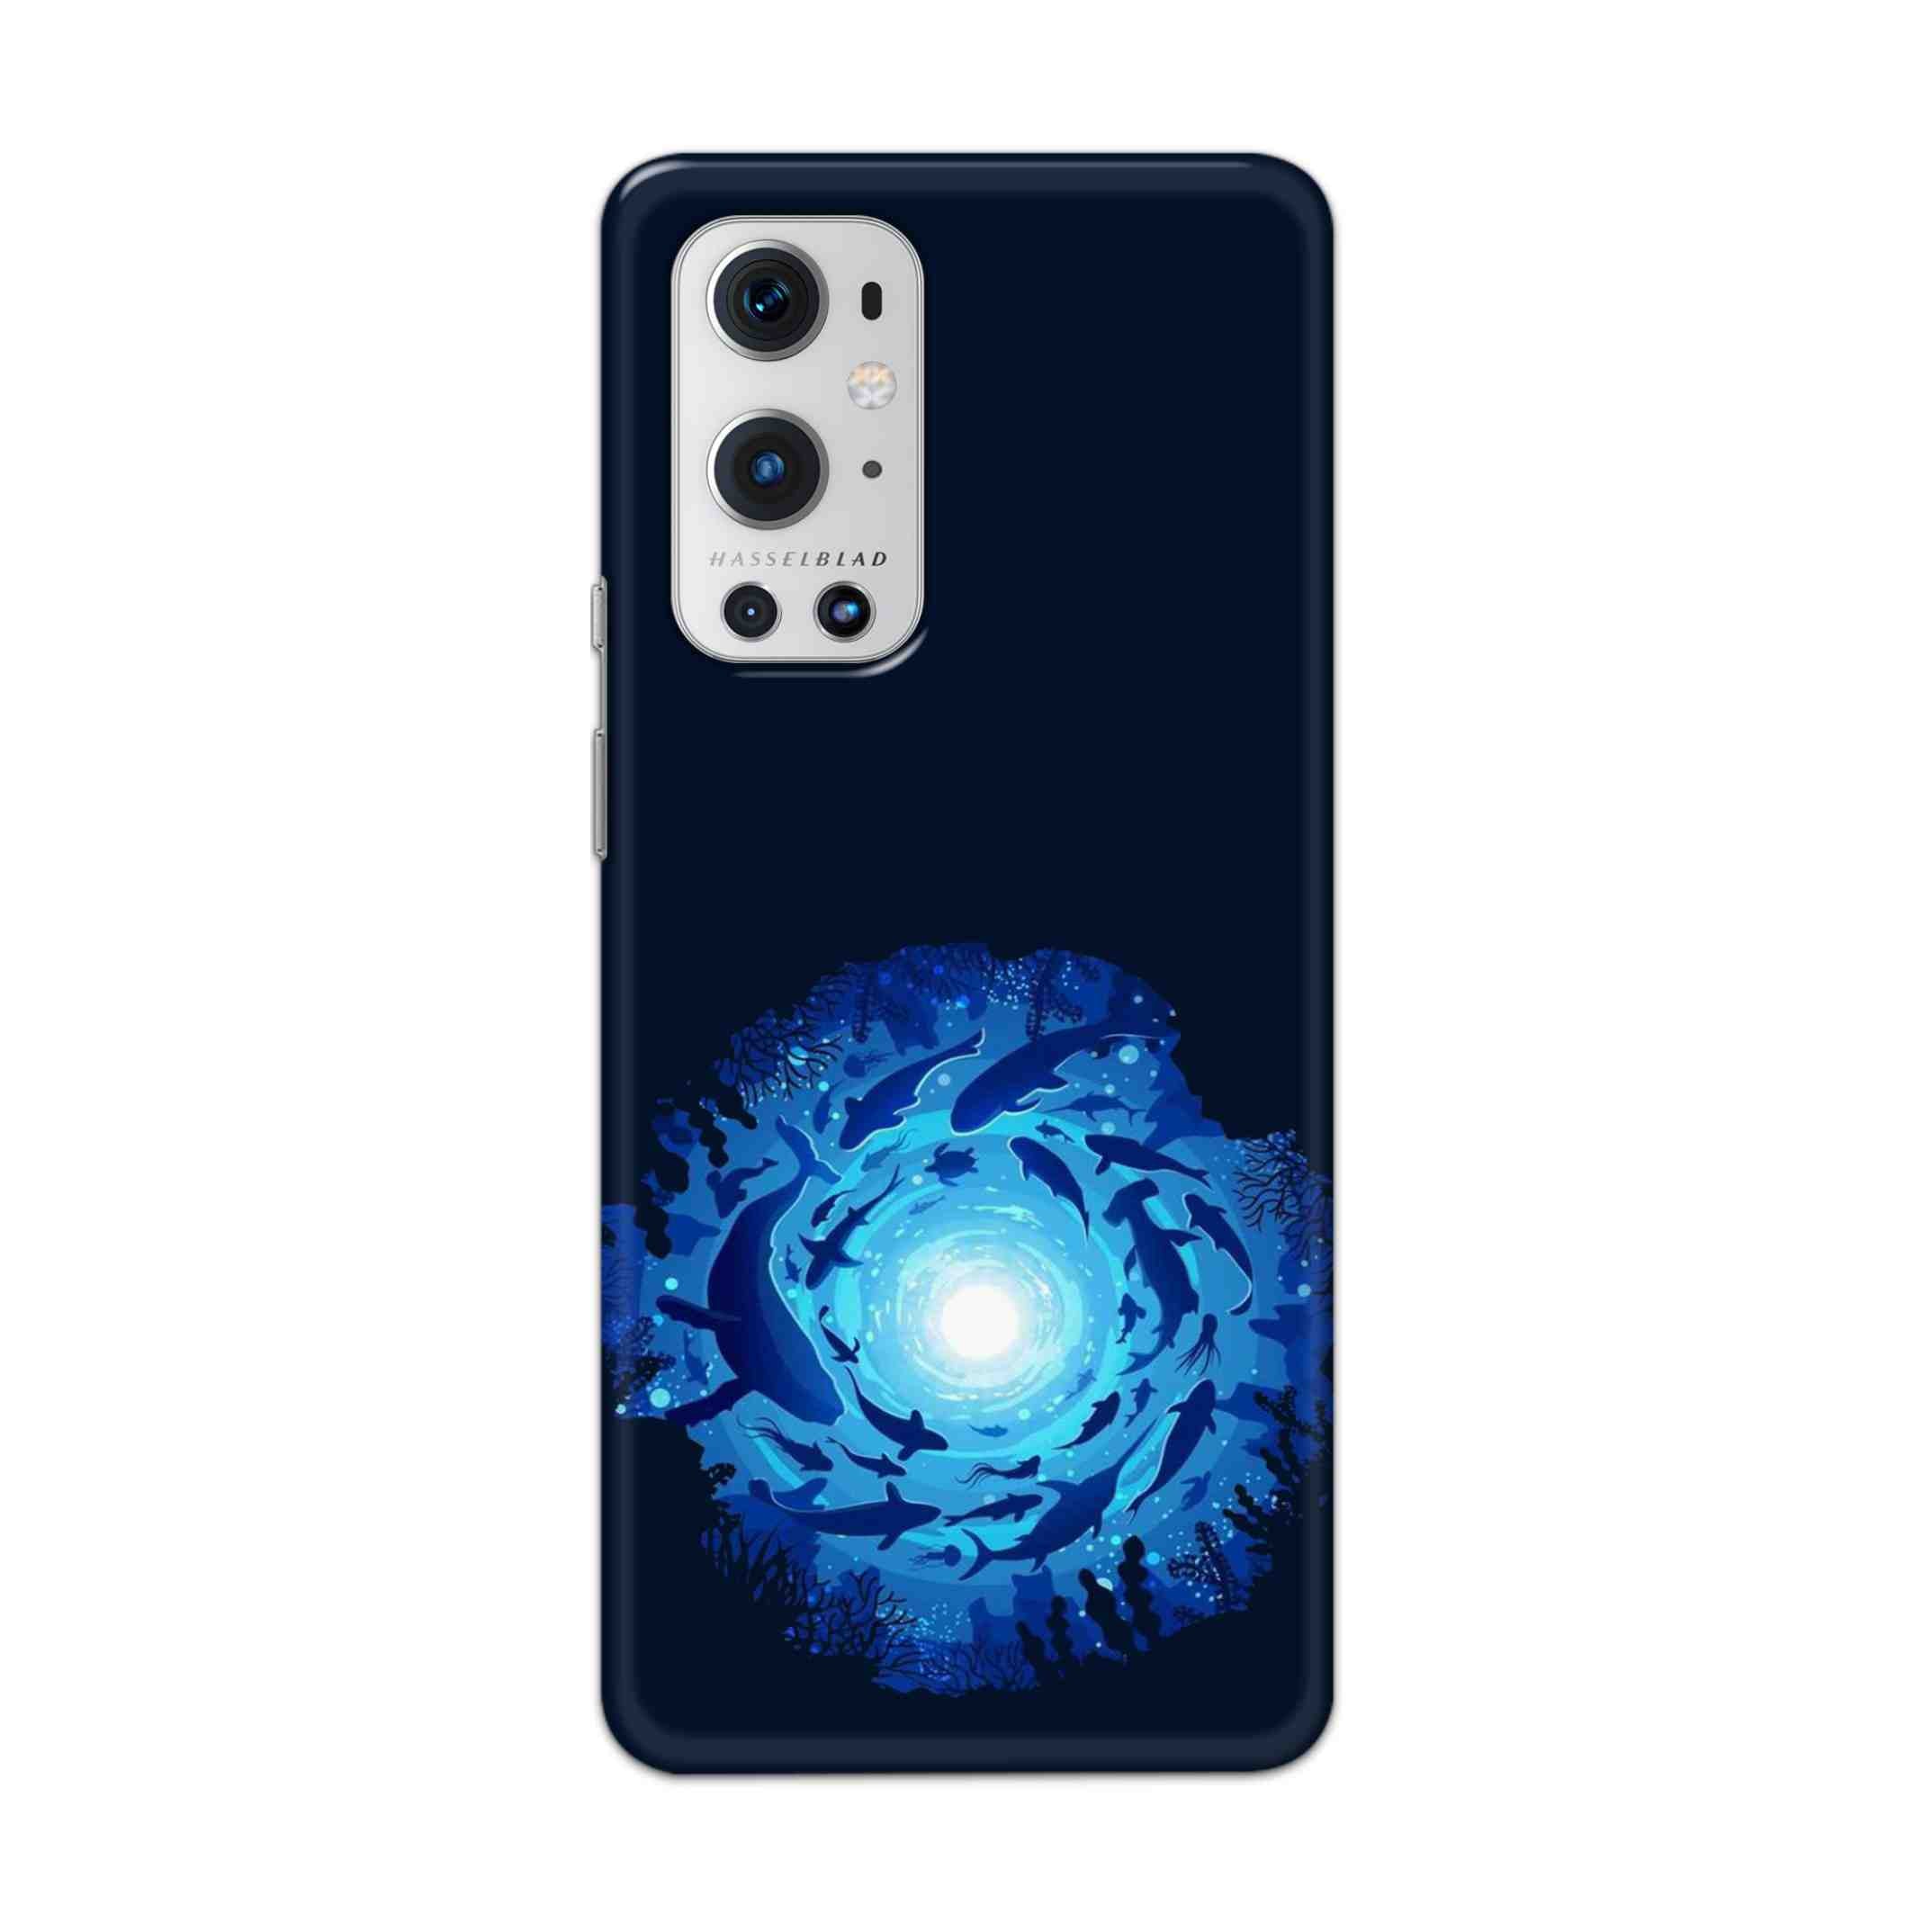 Buy Blue Whale Hard Back Mobile Phone Case Cover For OnePlus 9 Pro Online